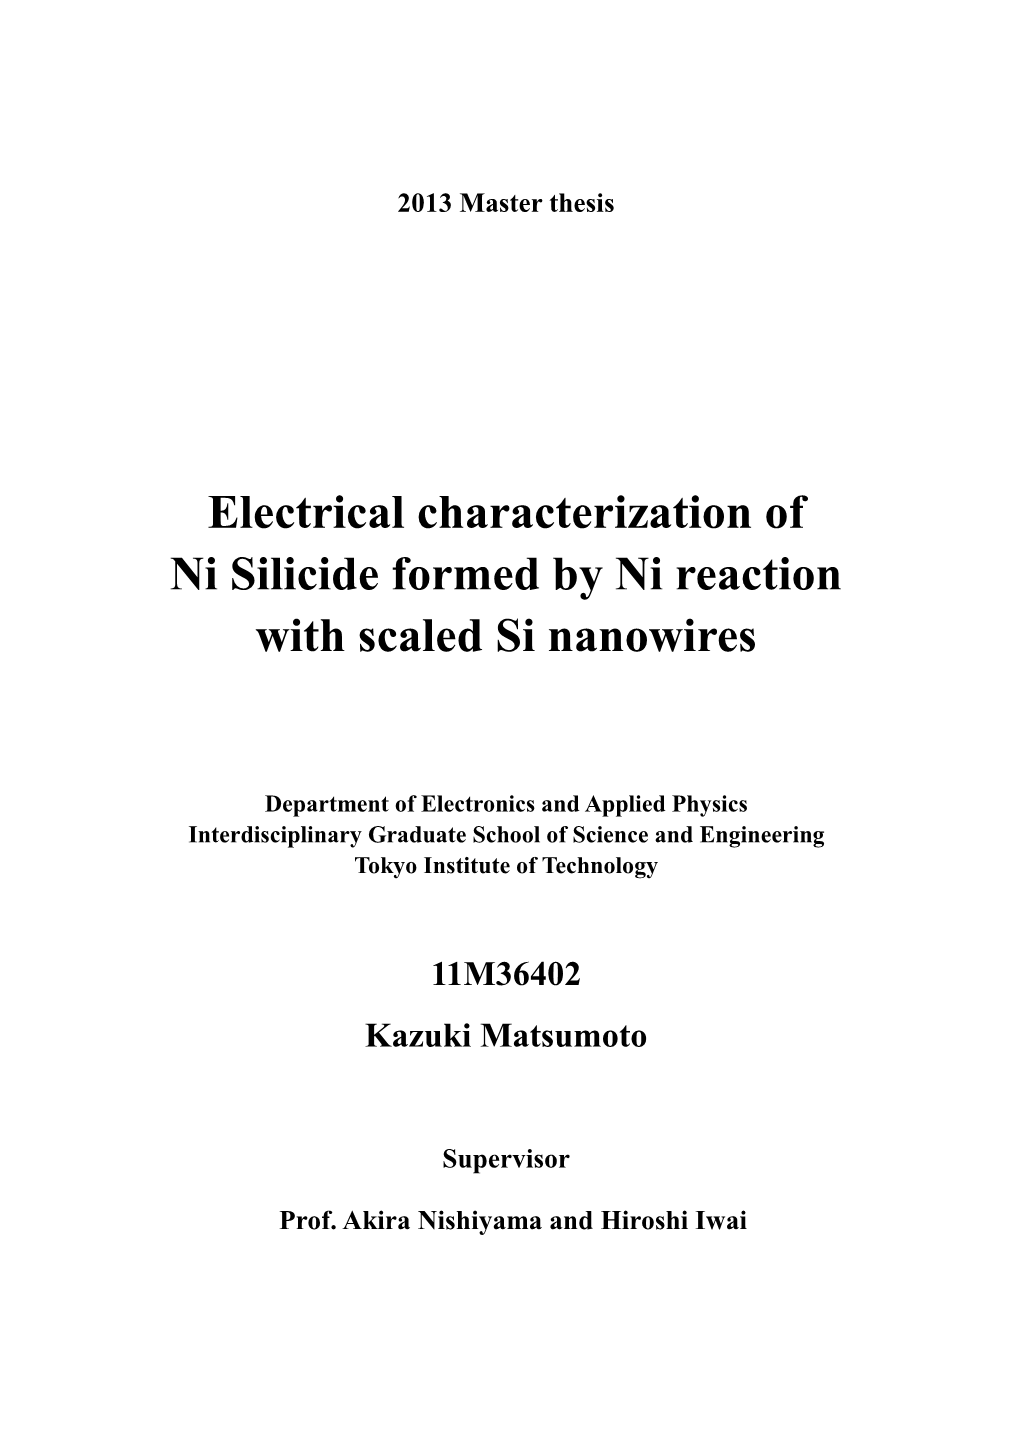 Electrical Characterization of Ni Silicide Formed by Ni Reaction with Scaled Si Nanowires